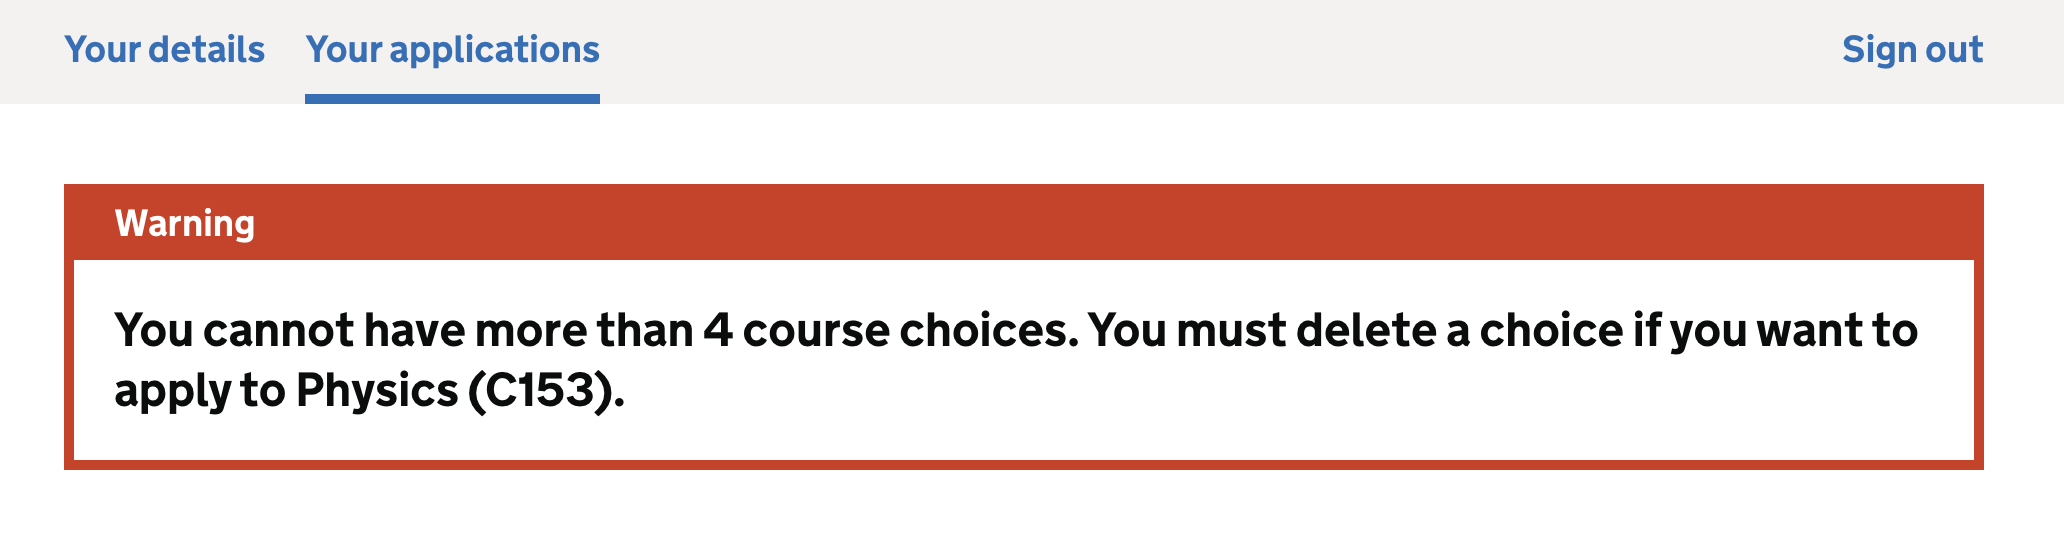 Screenshot of a red warning banner with content saying 'You cannot apply to a course because you already have applied to the maximum number of courses.